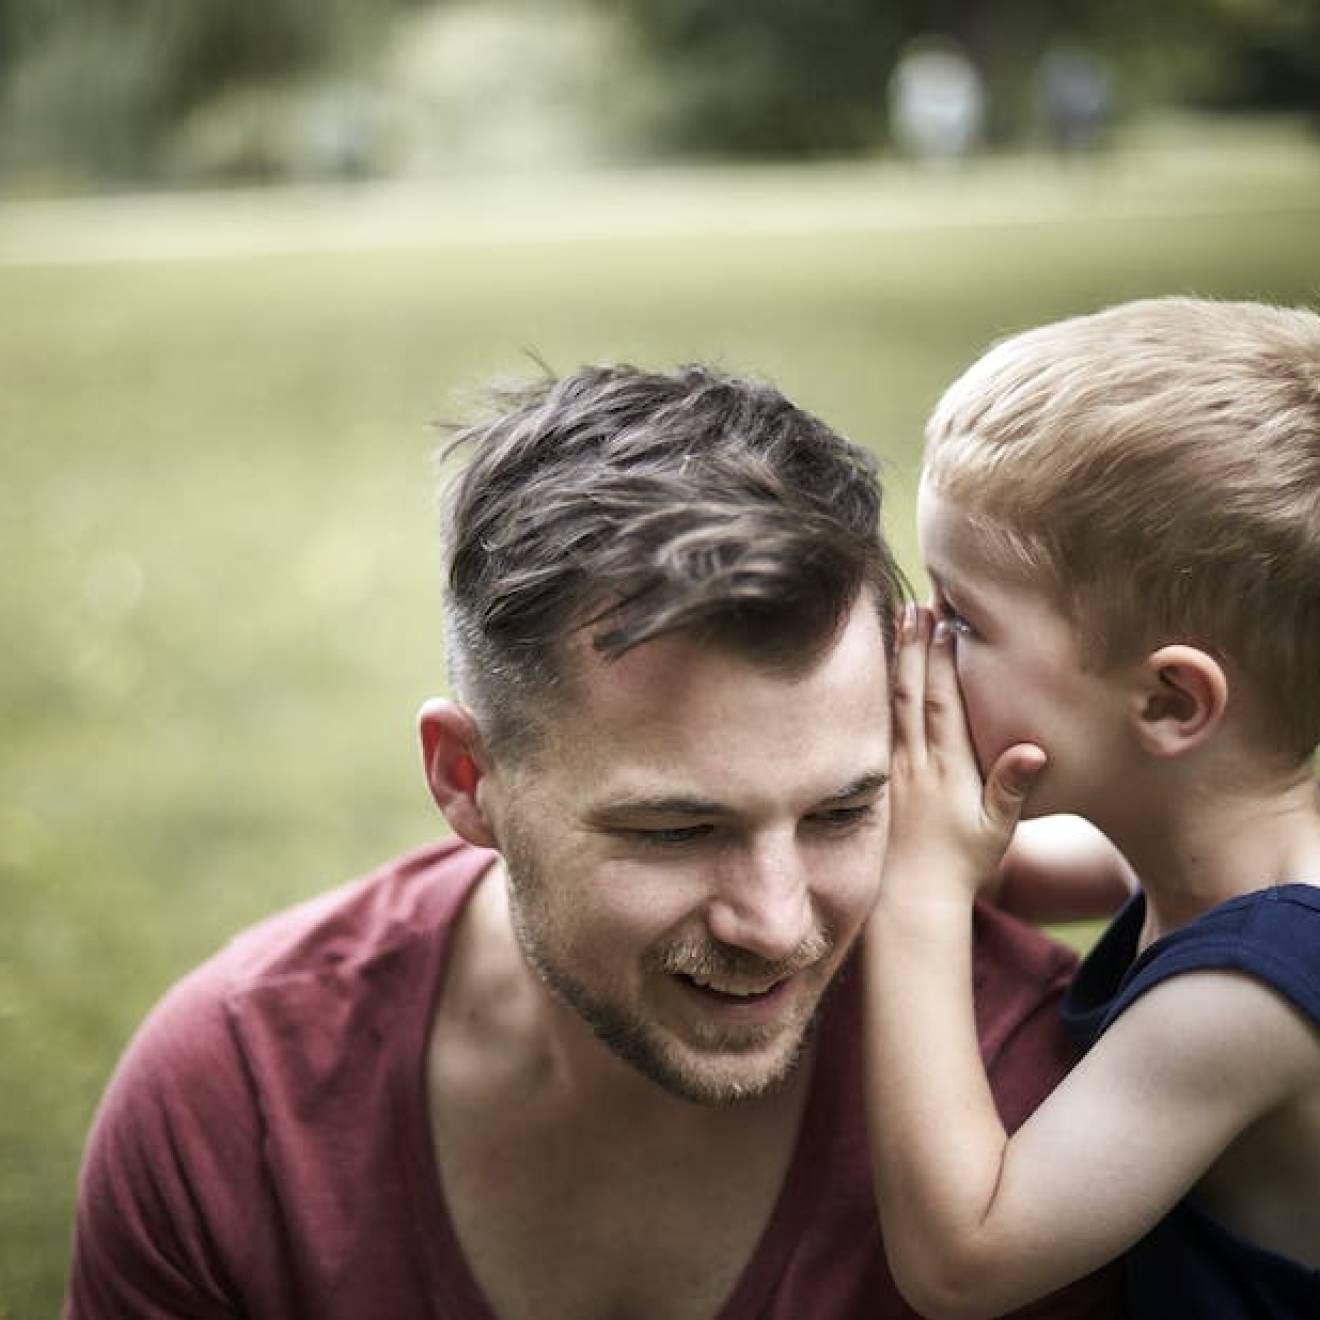 Child whispering in father's ear